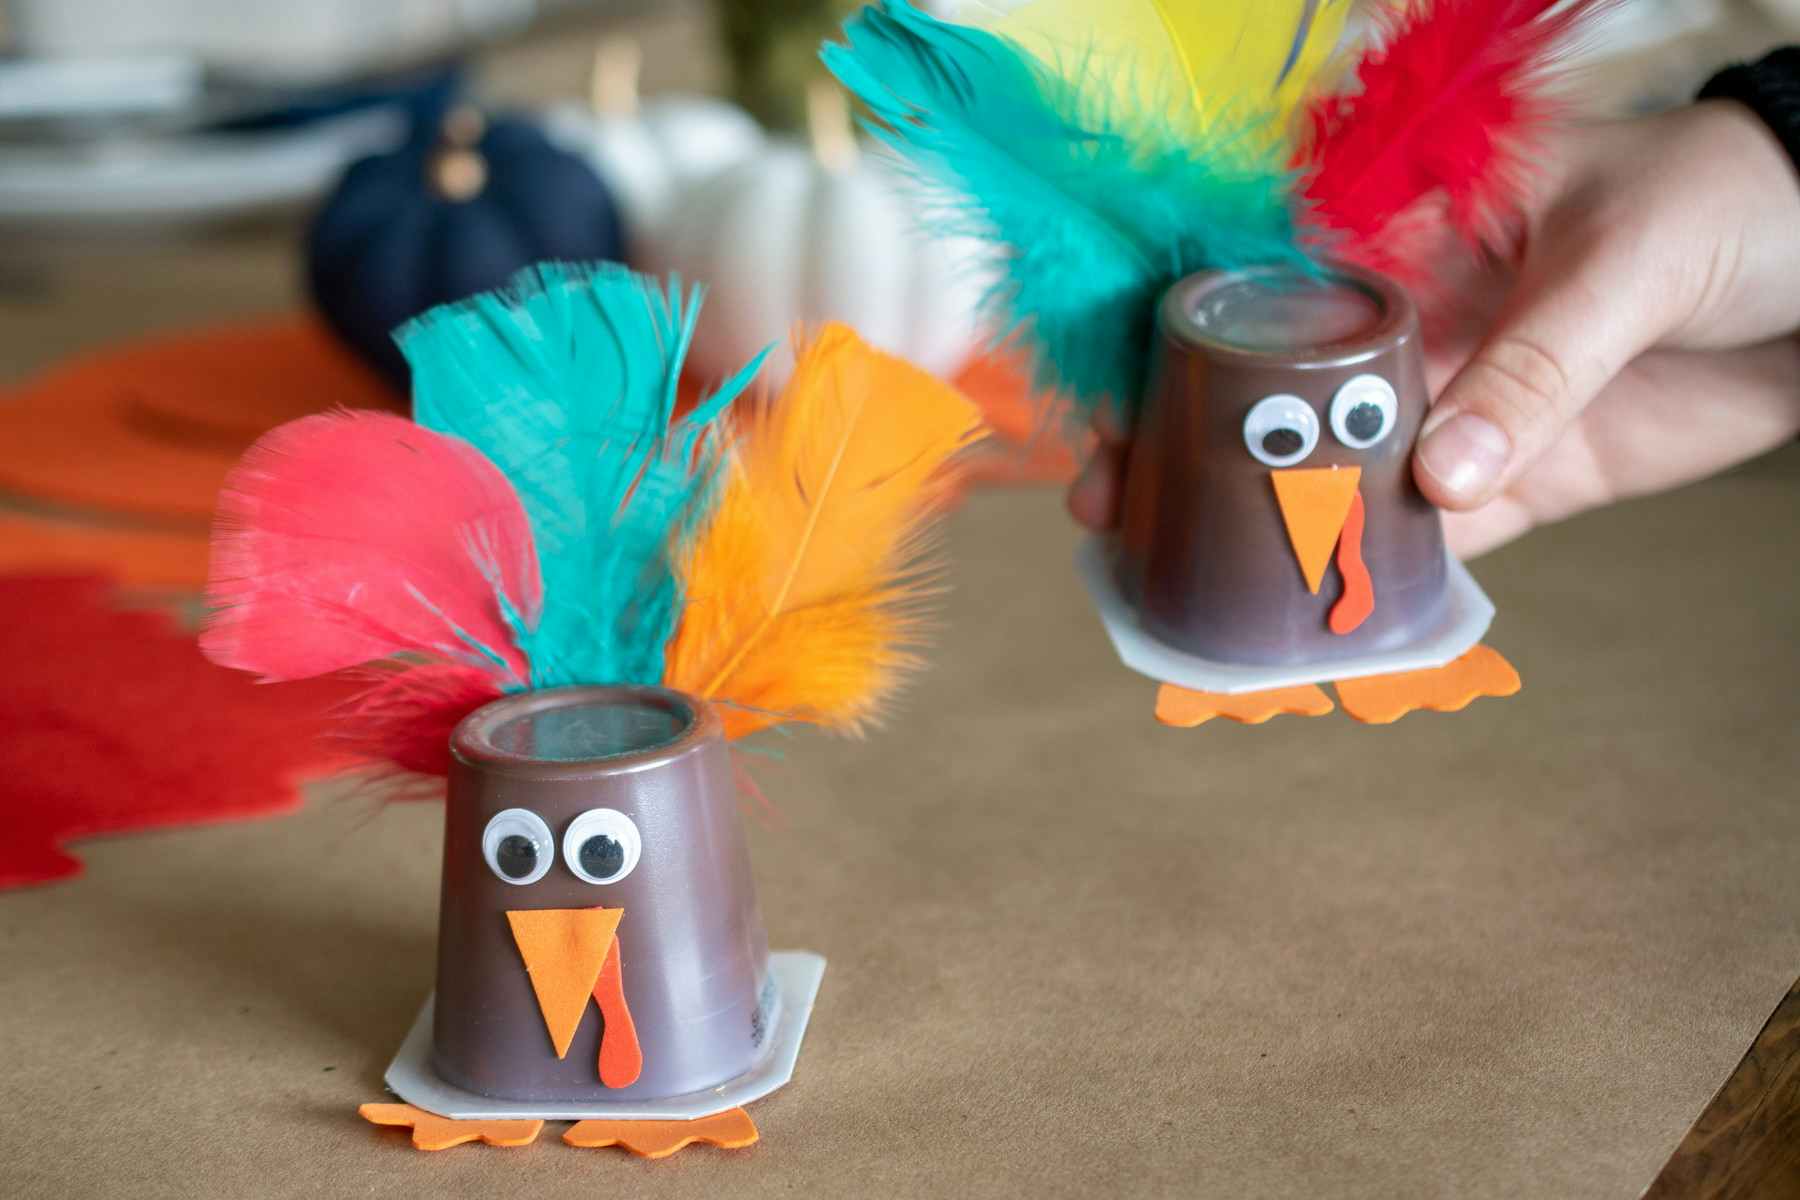 Chocolate pudding cups made to look likeThanksgiving turkey with googly eyes, and colorful feathers.